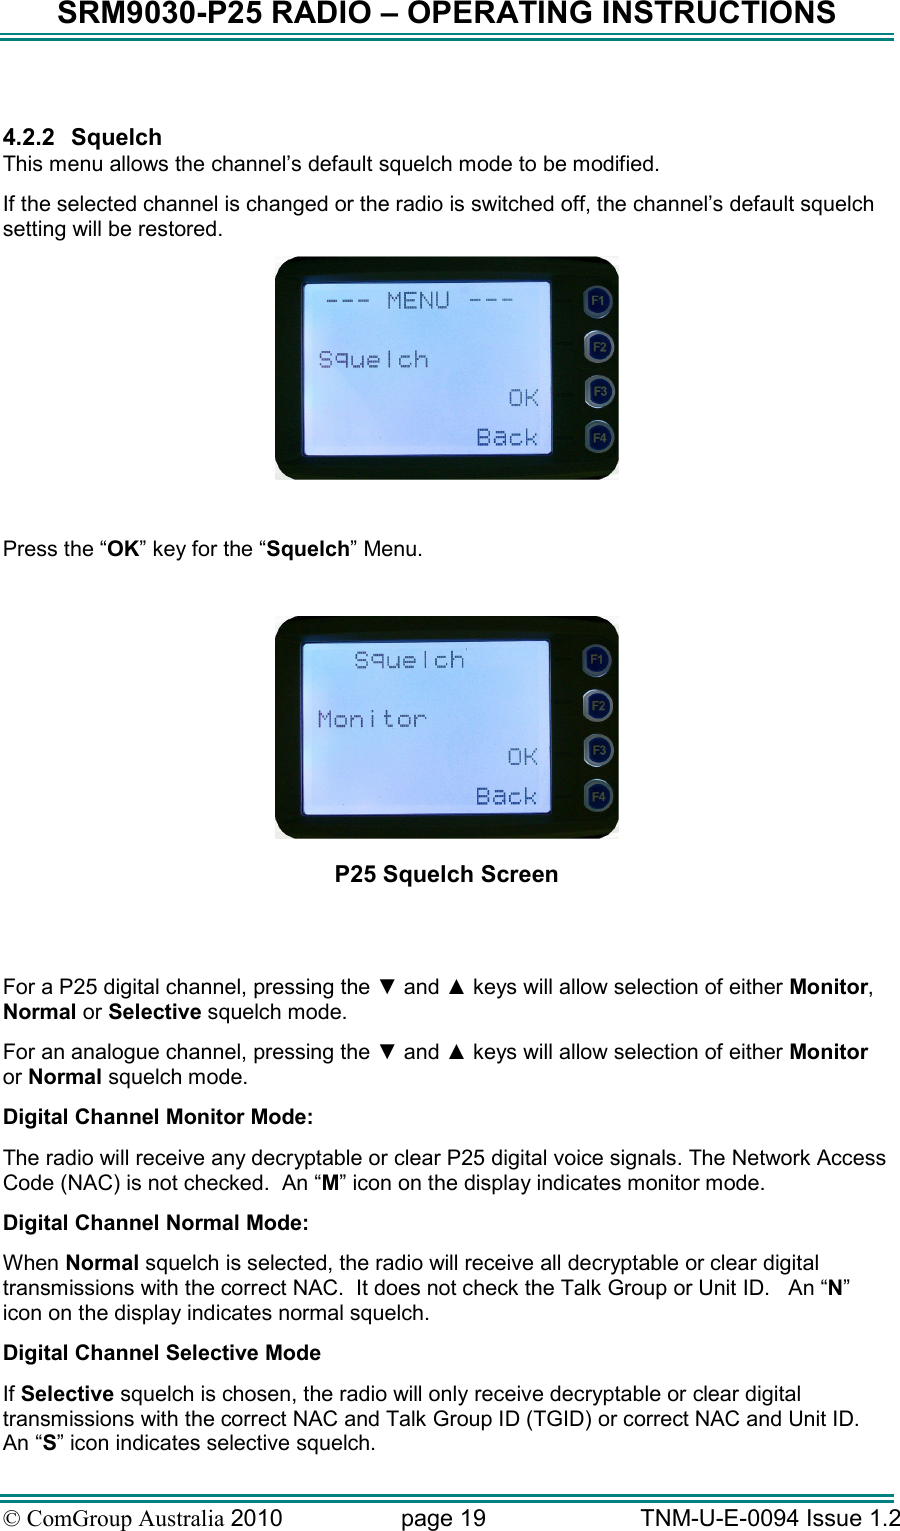 SRM9030-P25 RADIO – OPERATING INSTRUCTIONS © ComGroup Australia 2010  page 19   TNM-U-E-0094 Issue 1.2  4.2.2  Squelch This menu allows the channel’s default squelch mode to be modified. If the selected channel is changed or the radio is switched off, the channel’s default squelch setting will be restored.   Press the “OK” key for the “Squelch” Menu.   P25 Squelch Screen   For a P25 digital channel, pressing the ▼ and ▲ keys will allow selection of either Monitor, Normal or Selective squelch mode.   For an analogue channel, pressing the ▼ and ▲ keys will allow selection of either Monitor or Normal squelch mode.   Digital Channel Monitor Mode:   The radio will receive any decryptable or clear P25 digital voice signals. The Network Access Code (NAC) is not checked.  An “M” icon on the display indicates monitor mode. Digital Channel Normal Mode: When Normal squelch is selected, the radio will receive all decryptable or clear digital transmissions with the correct NAC.  It does not check the Talk Group or Unit ID.   An “N” icon on the display indicates normal squelch. Digital Channel Selective Mode If Selective squelch is chosen, the radio will only receive decryptable or clear digital transmissions with the correct NAC and Talk Group ID (TGID) or correct NAC and Unit ID.   An “S” icon indicates selective squelch. 